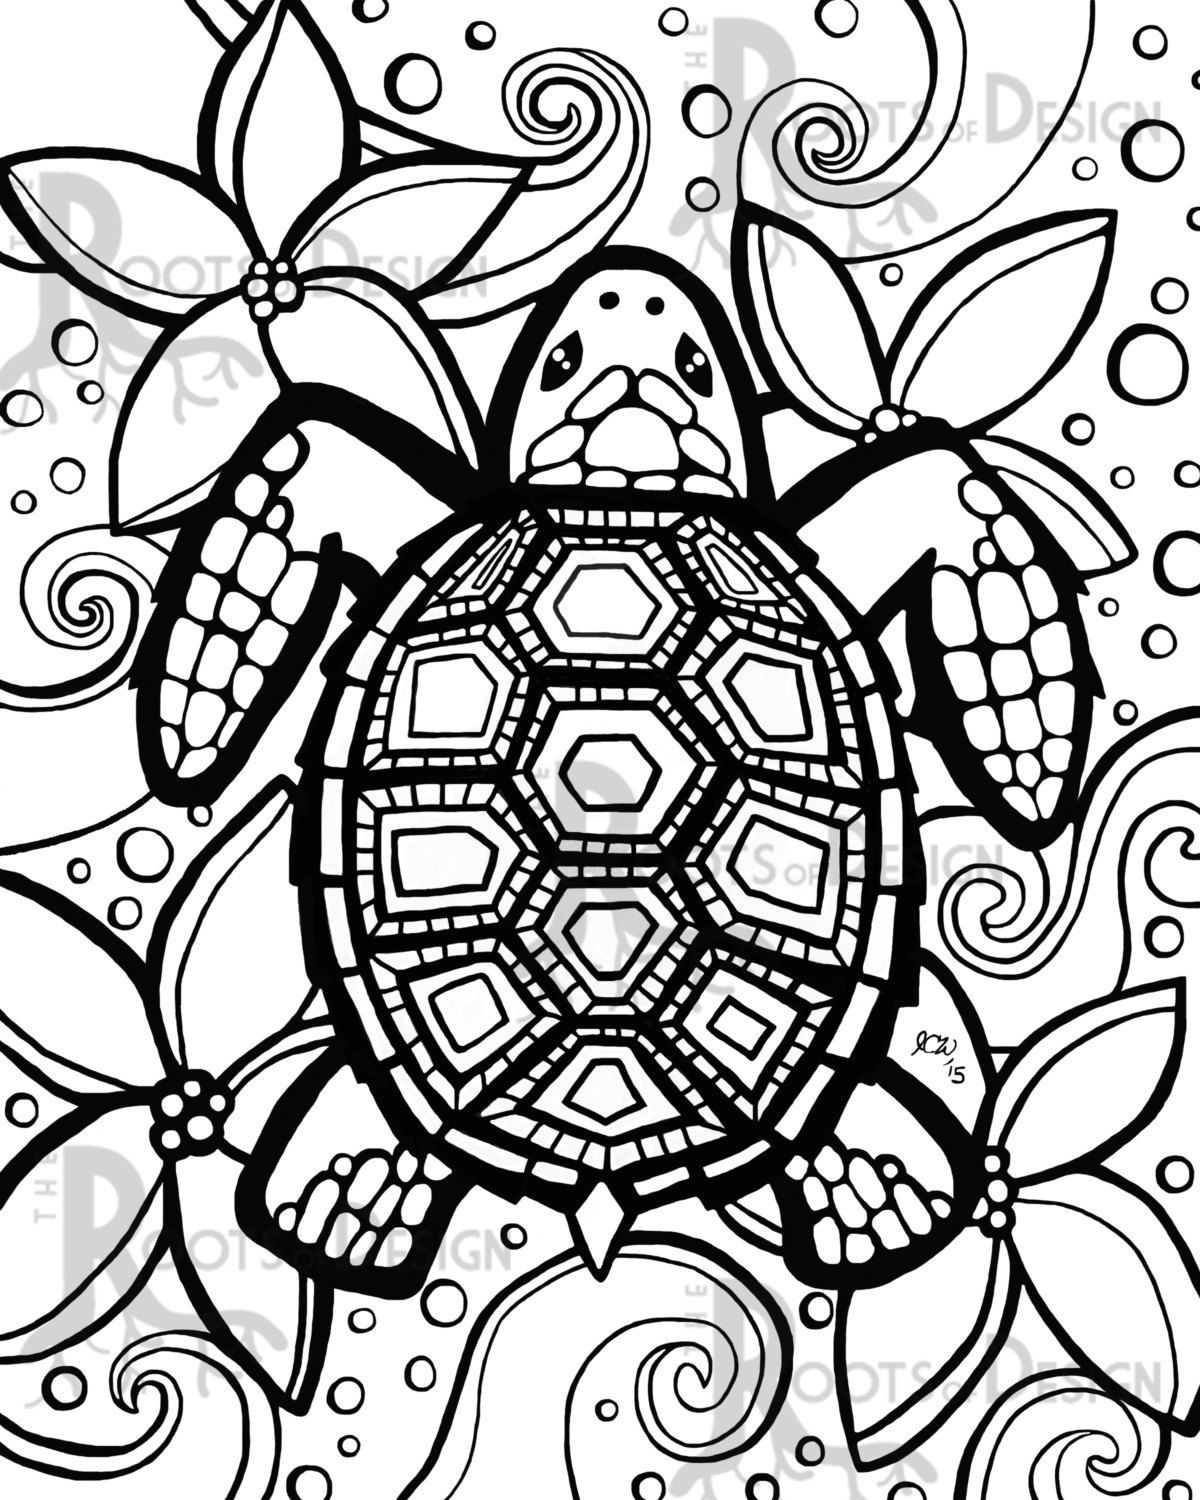 Turtle Coloring Pages For Adults
 turtle coloring pages Google Search